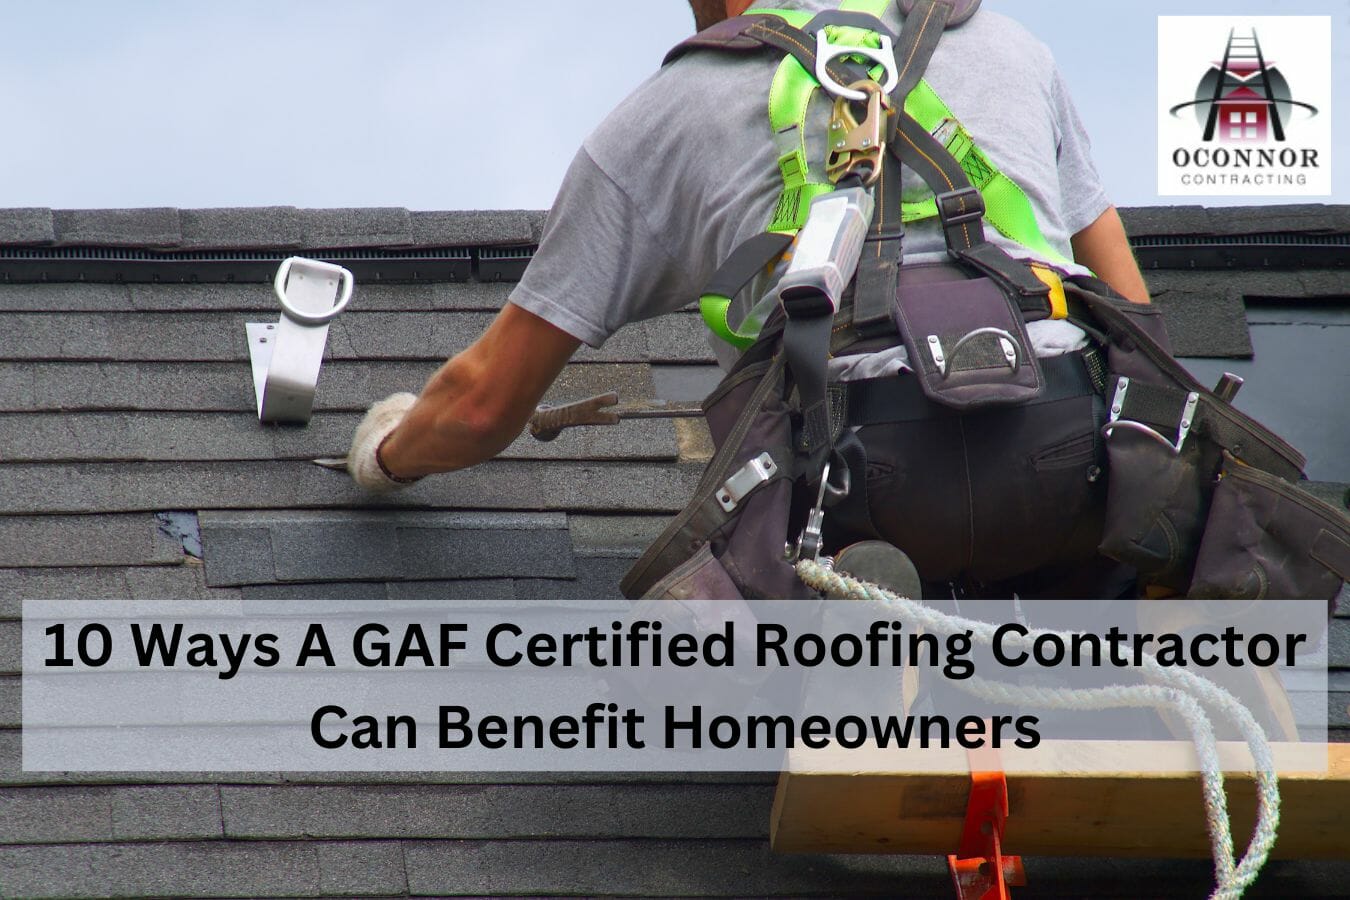 10 Ways A GAF Certified Roofing Contractor Can Benefit Homeowners